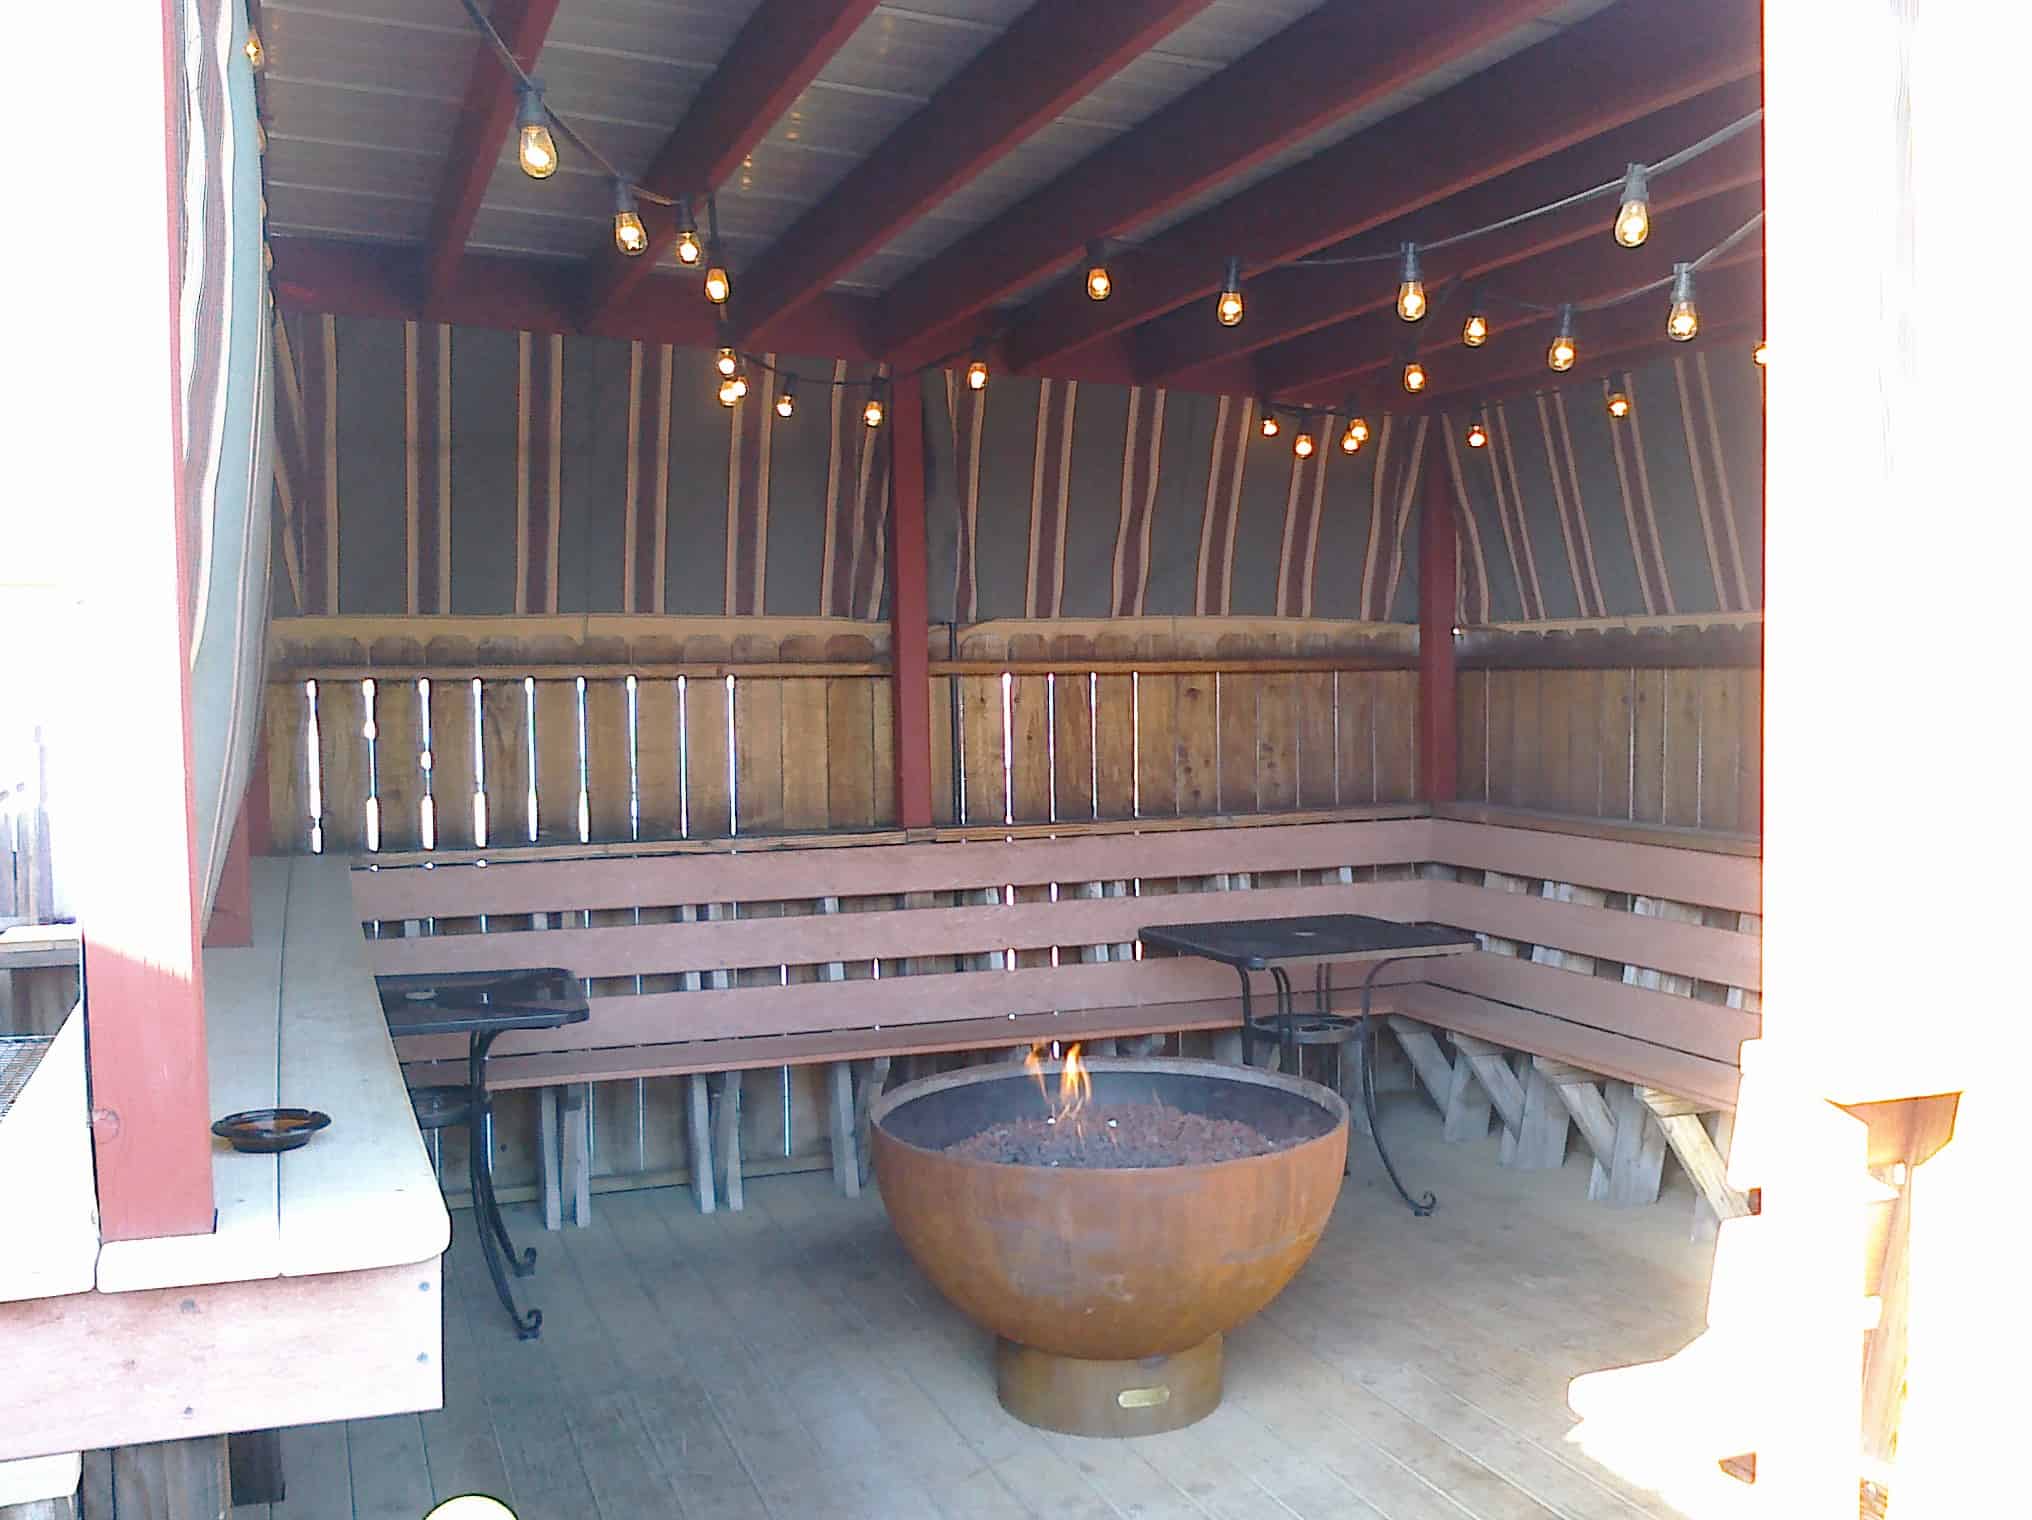 Covered Patio With A Fire Pit Things, Can You Use Fire Pit Under Covered Patio